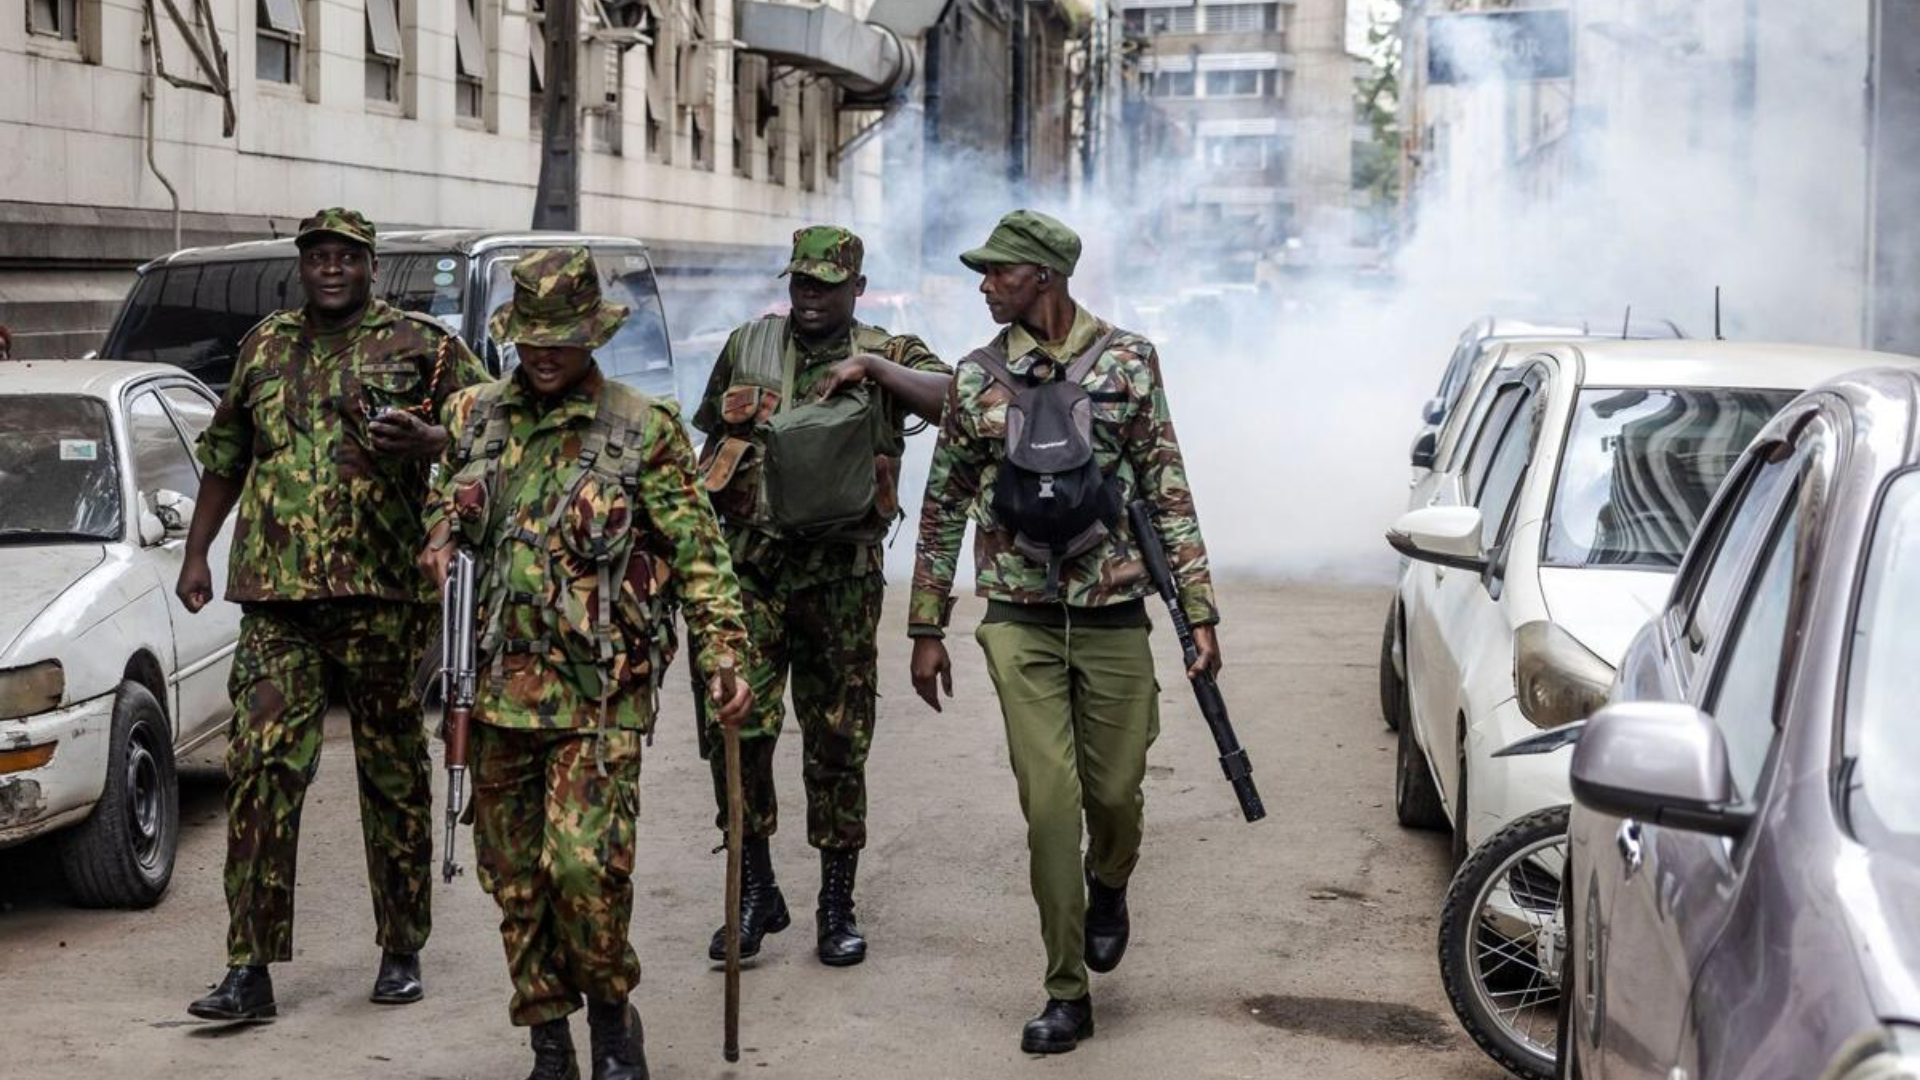 Kenya Finance Bill: 31 Injured, 5 Dead As Kenyan Police Fire Live Rounds At Demonstrators Protesting Against Controversial Bill